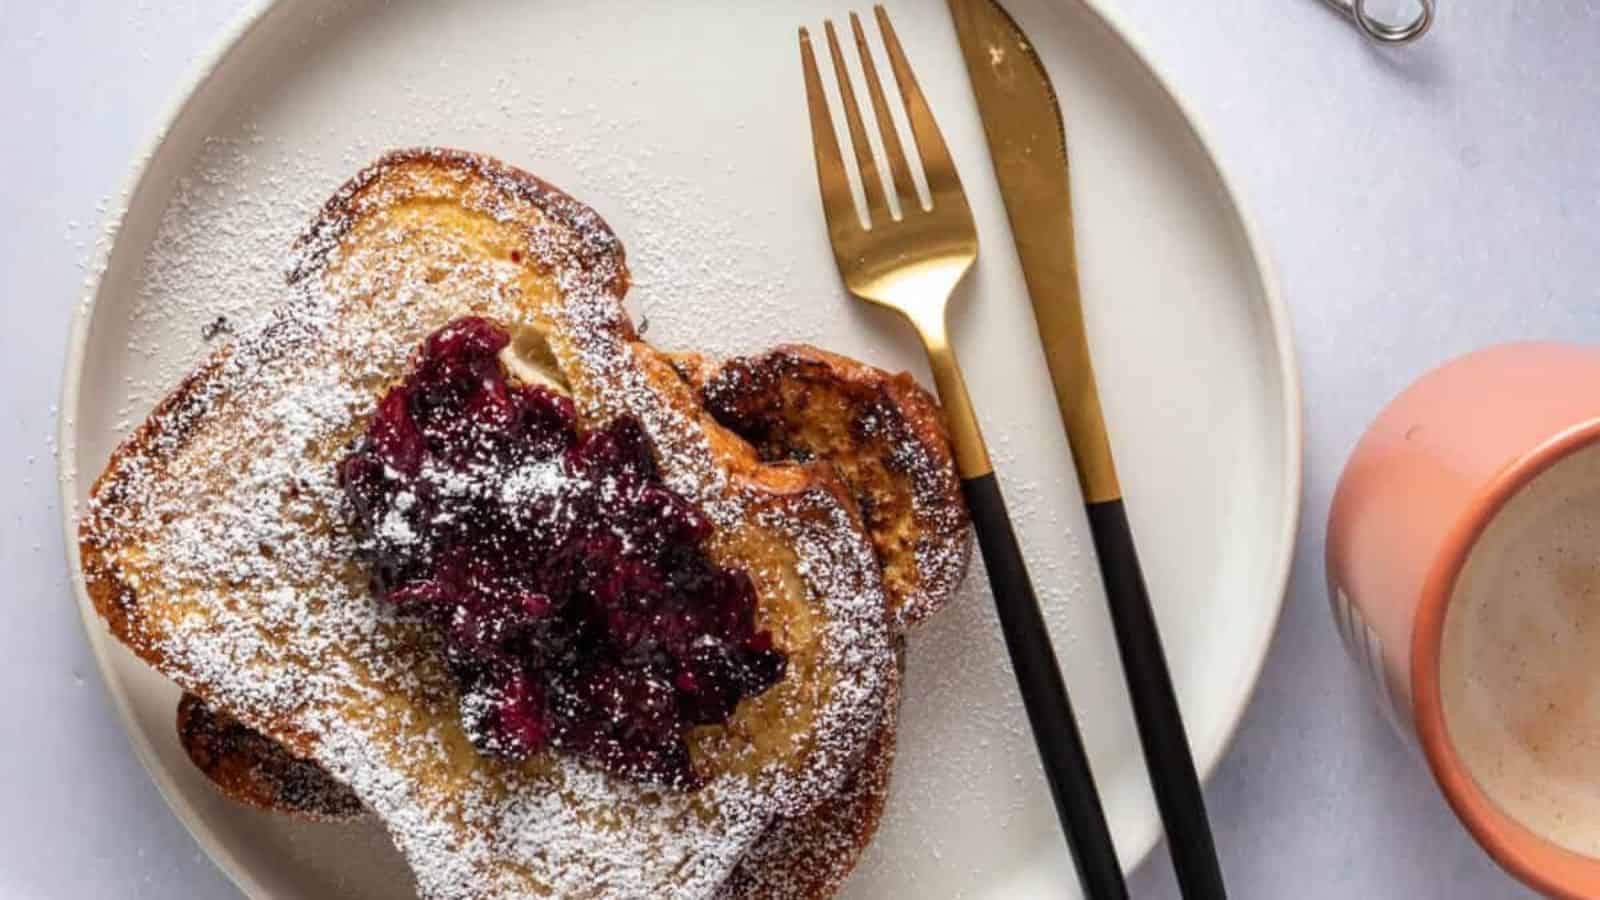 A close-up of French toast topped with berry compote, accompanied by utensils and a cup of coffee.